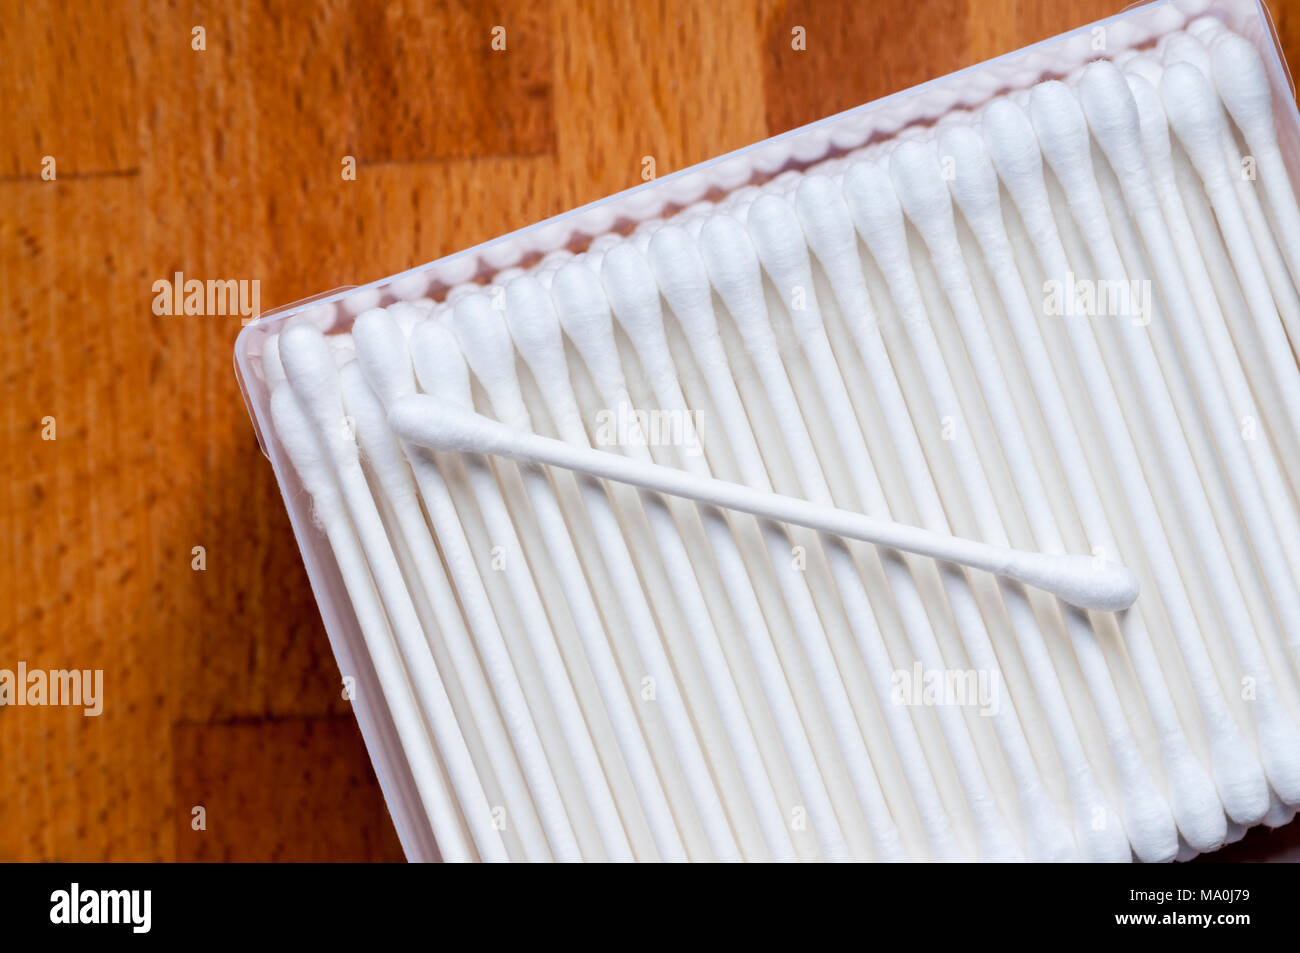 A box of cotton buds with paper sticks to avoid plastic pollution. Stock Photo